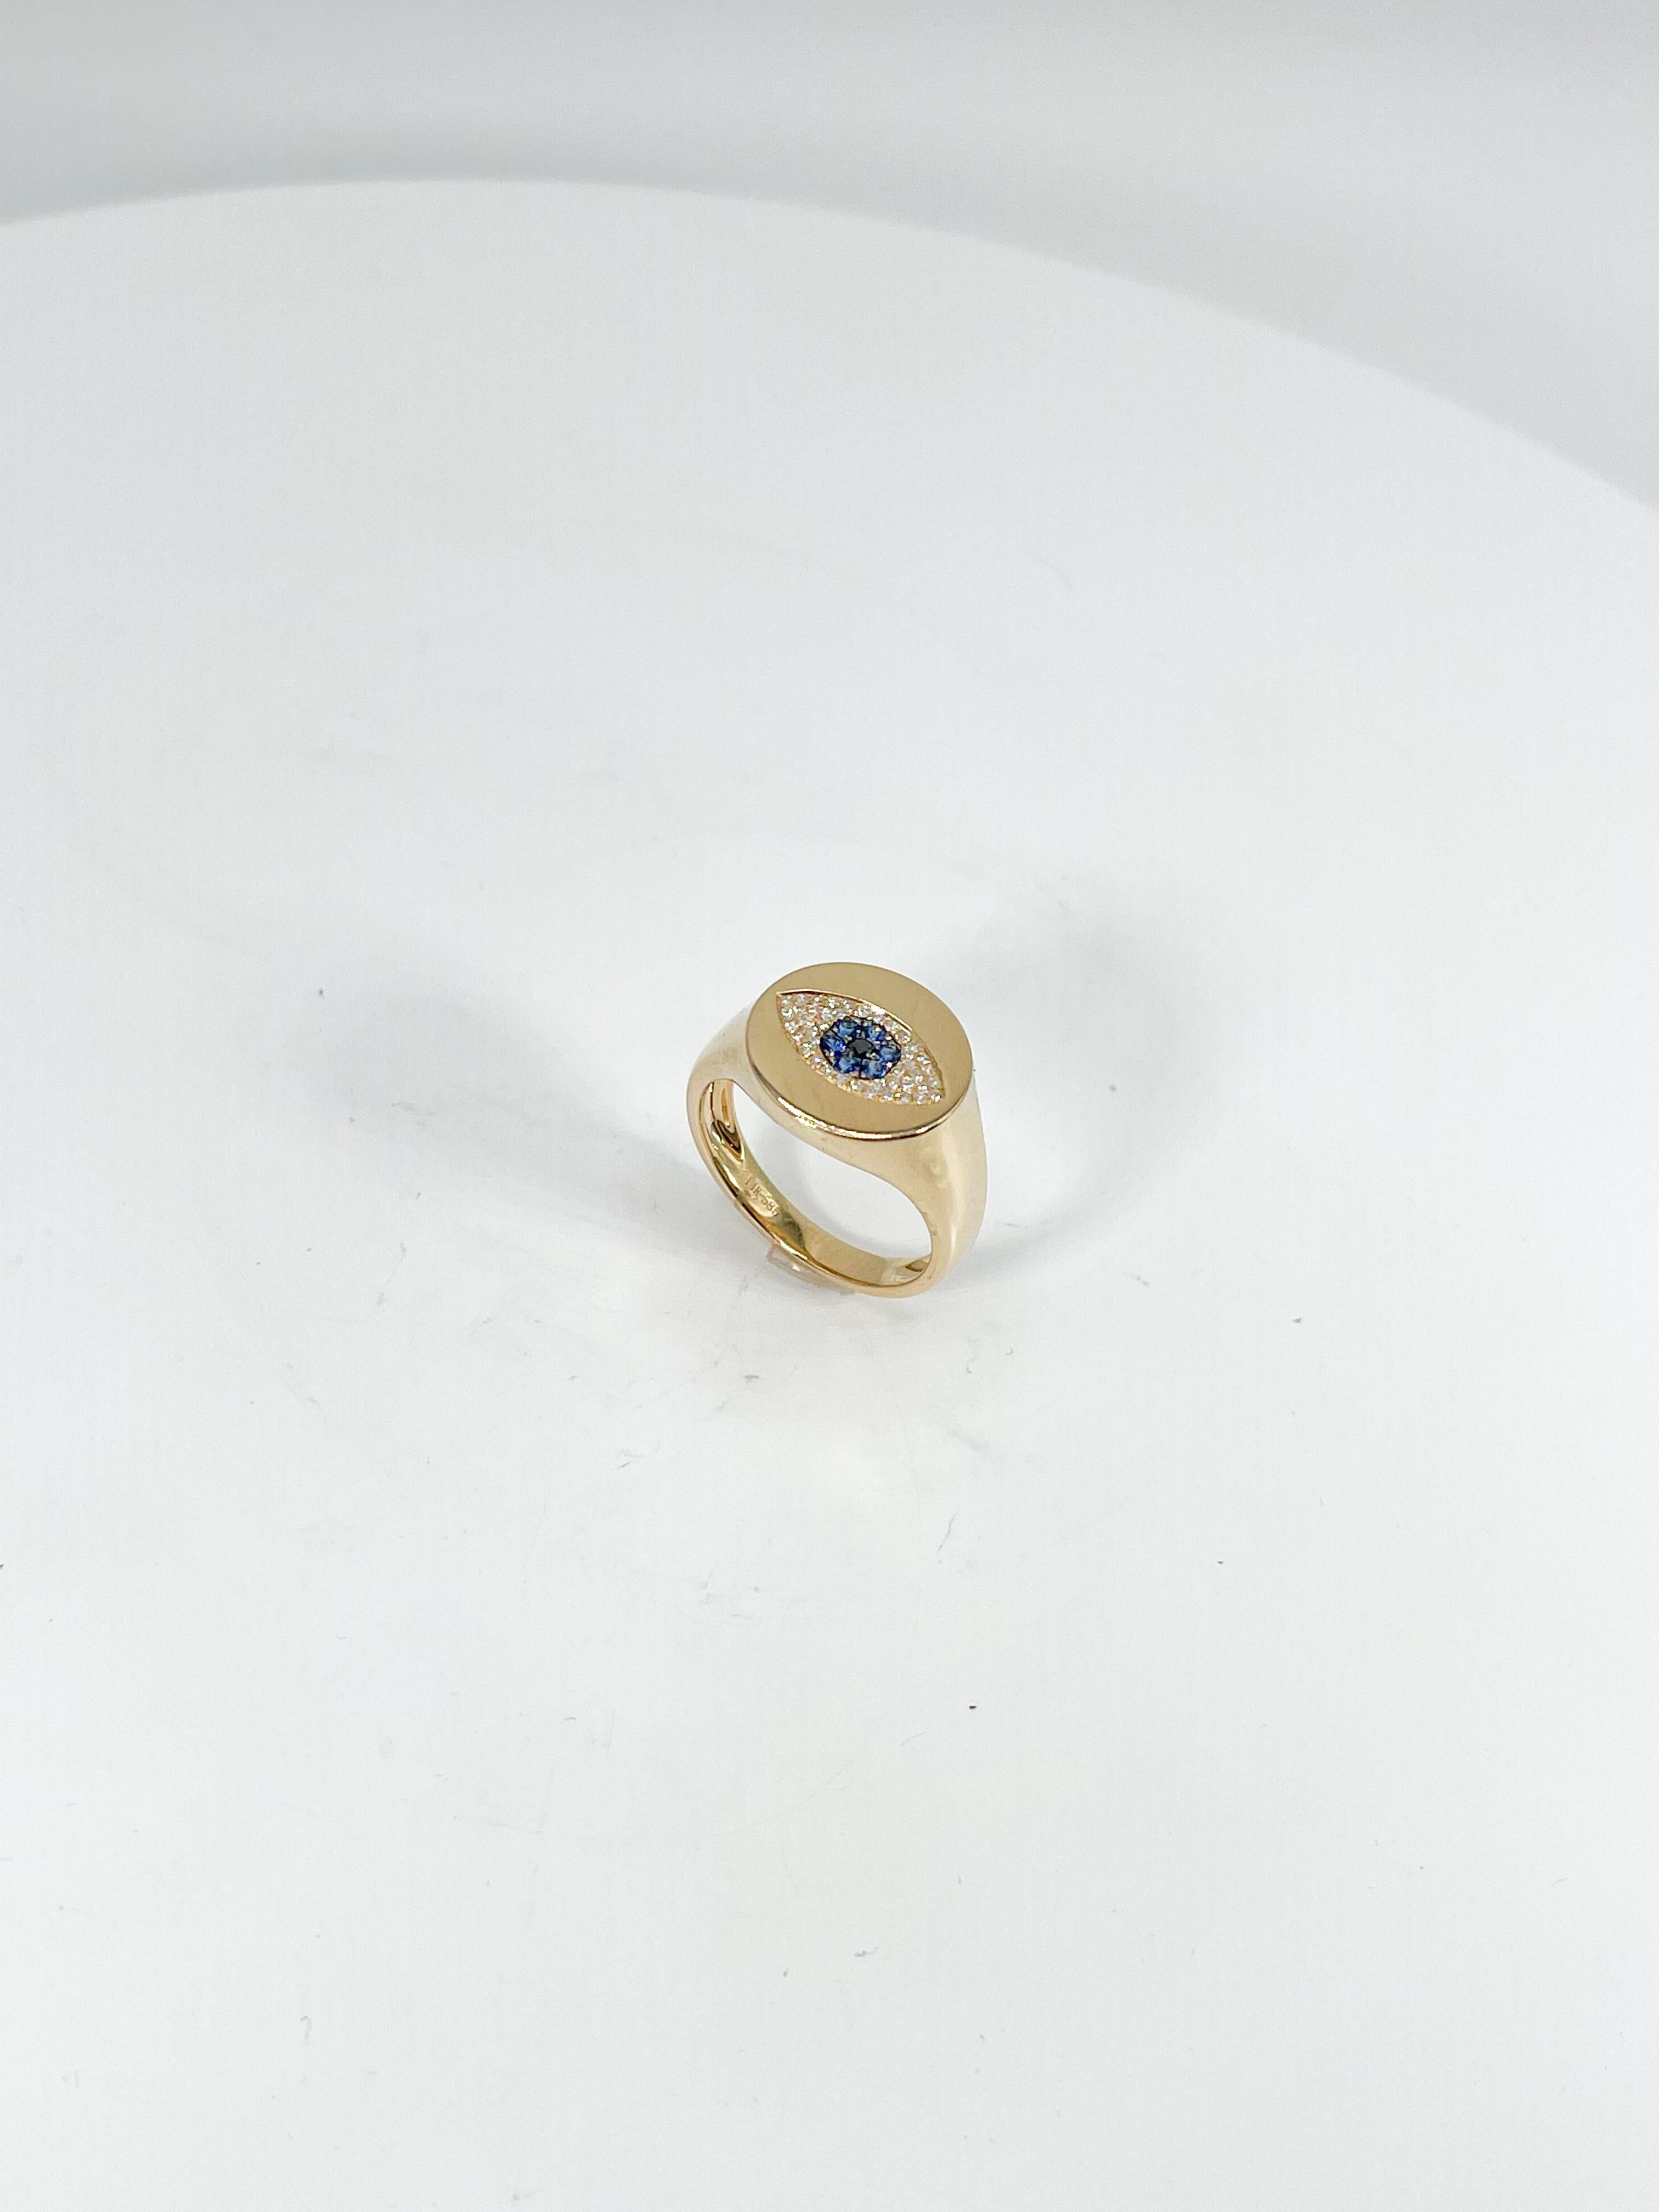 14k yellow gold .12 CTW diamond and .08 CTW sapphire evil eye ring. The stones are all round cut, the width of the ring is 13.5 mm, measures to be a size 7, and has a total weight of 4.6 grams.